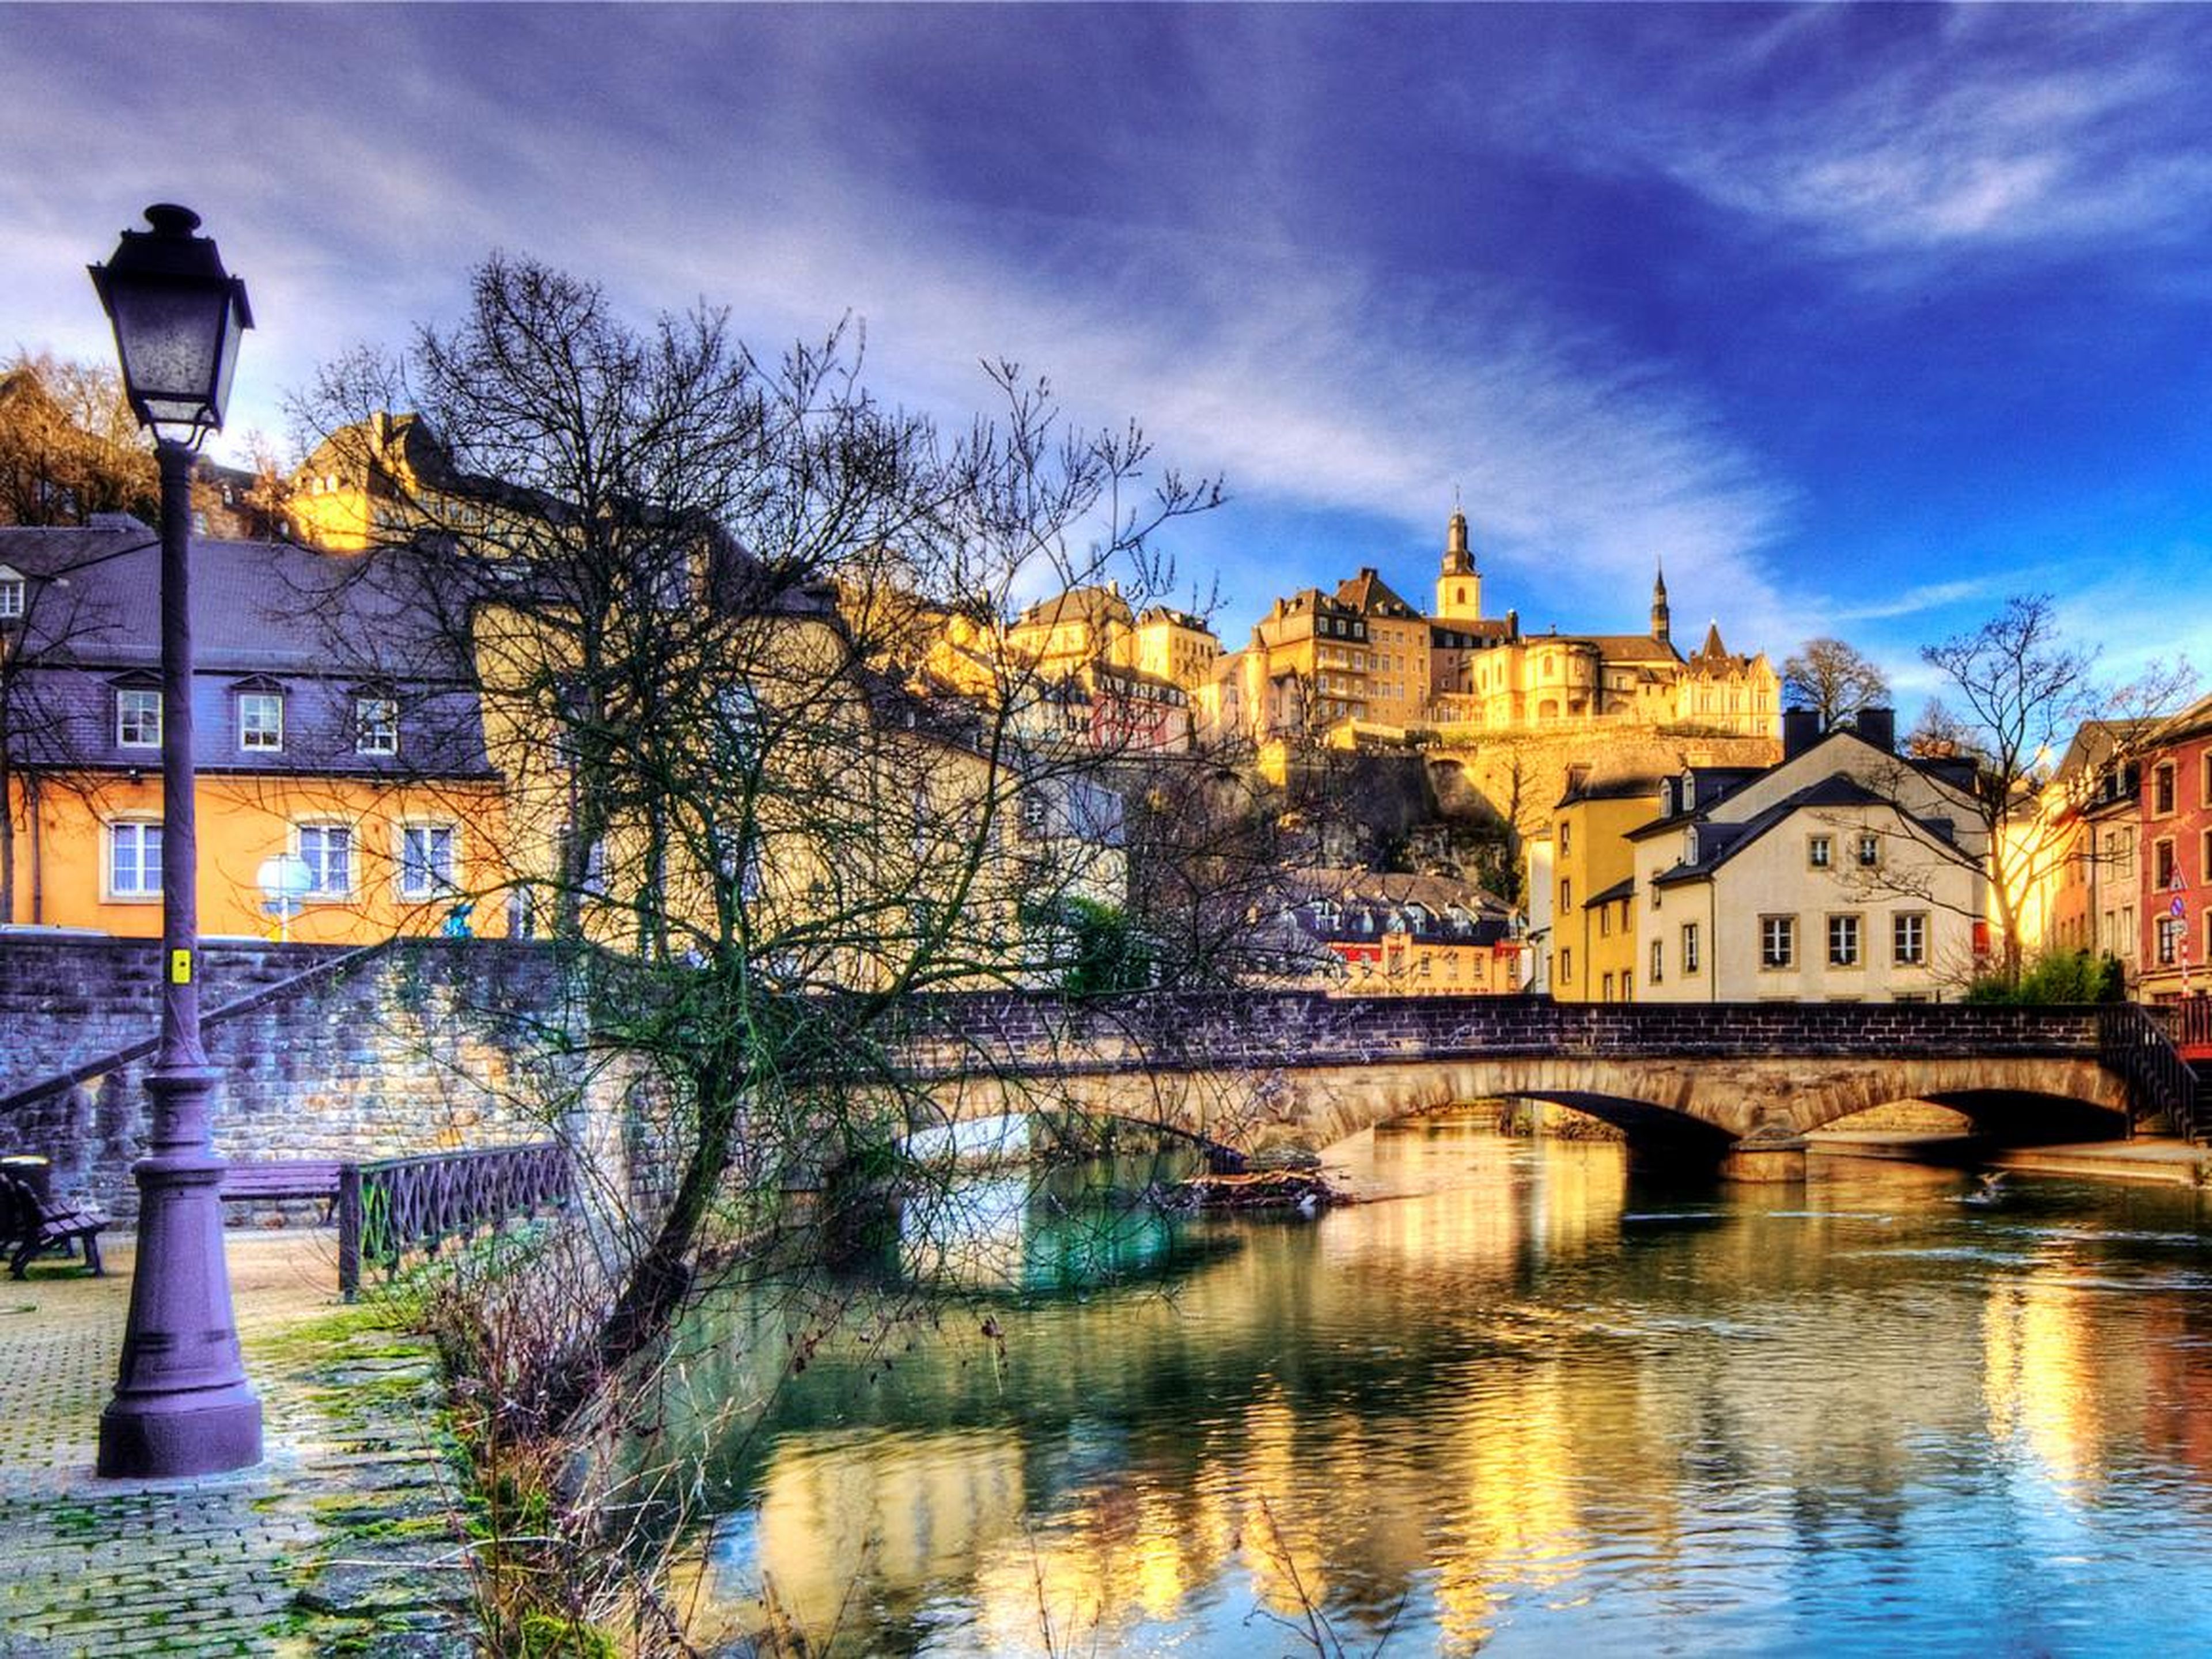 24. Luxembourg, Luxembourg